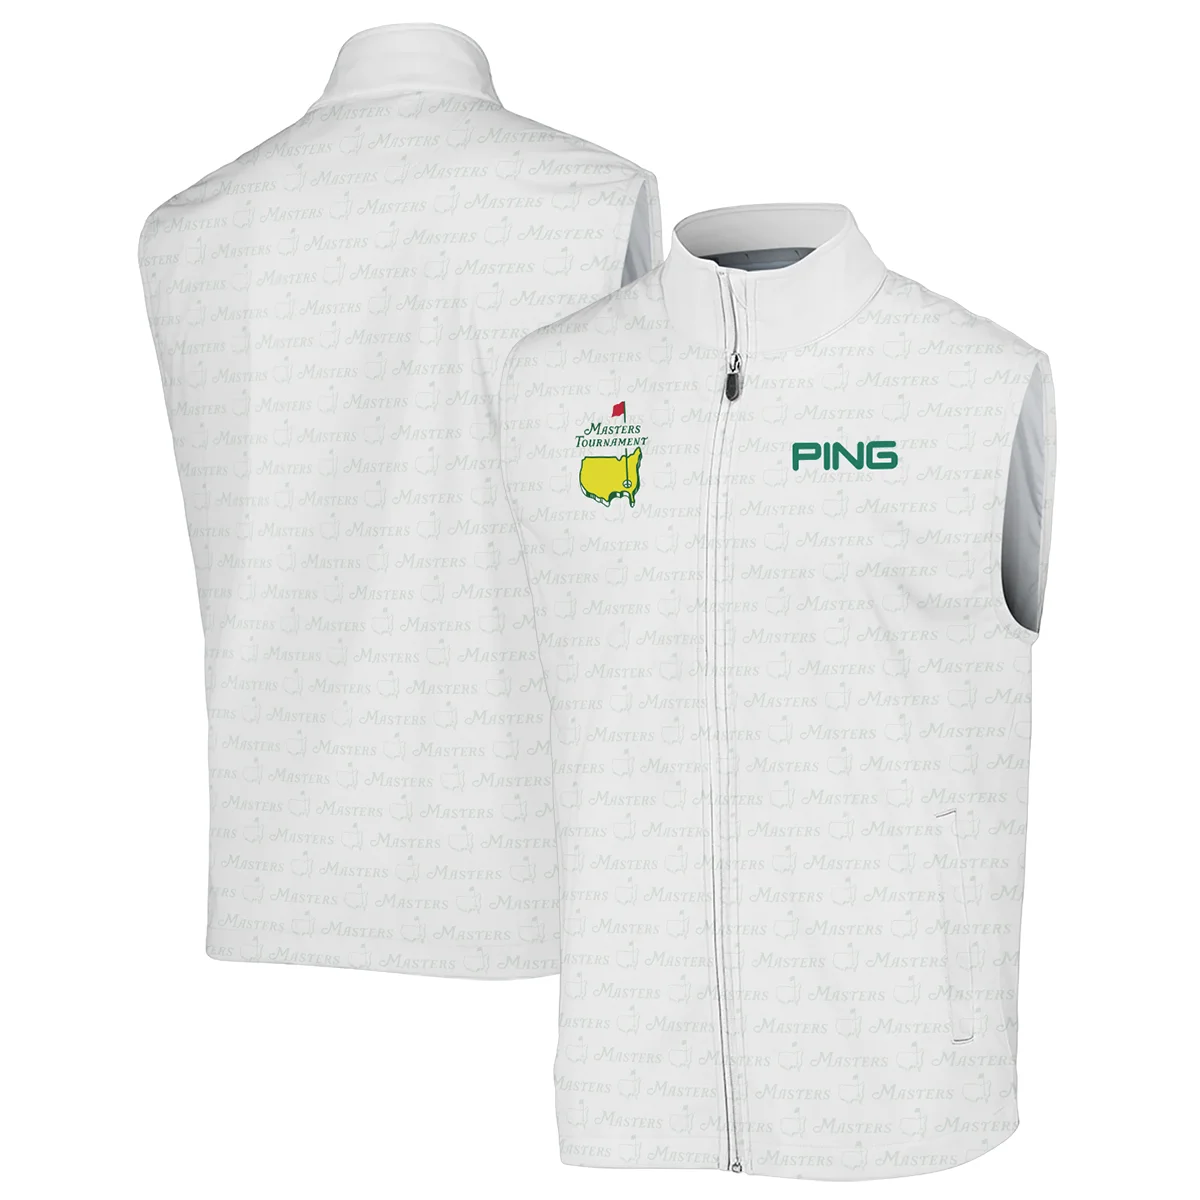 Golf Pattern Masters Tournament Ping Quarter-Zip Jacket White And Green Color Golf Sports All Over Print Quarter-Zip Jacket